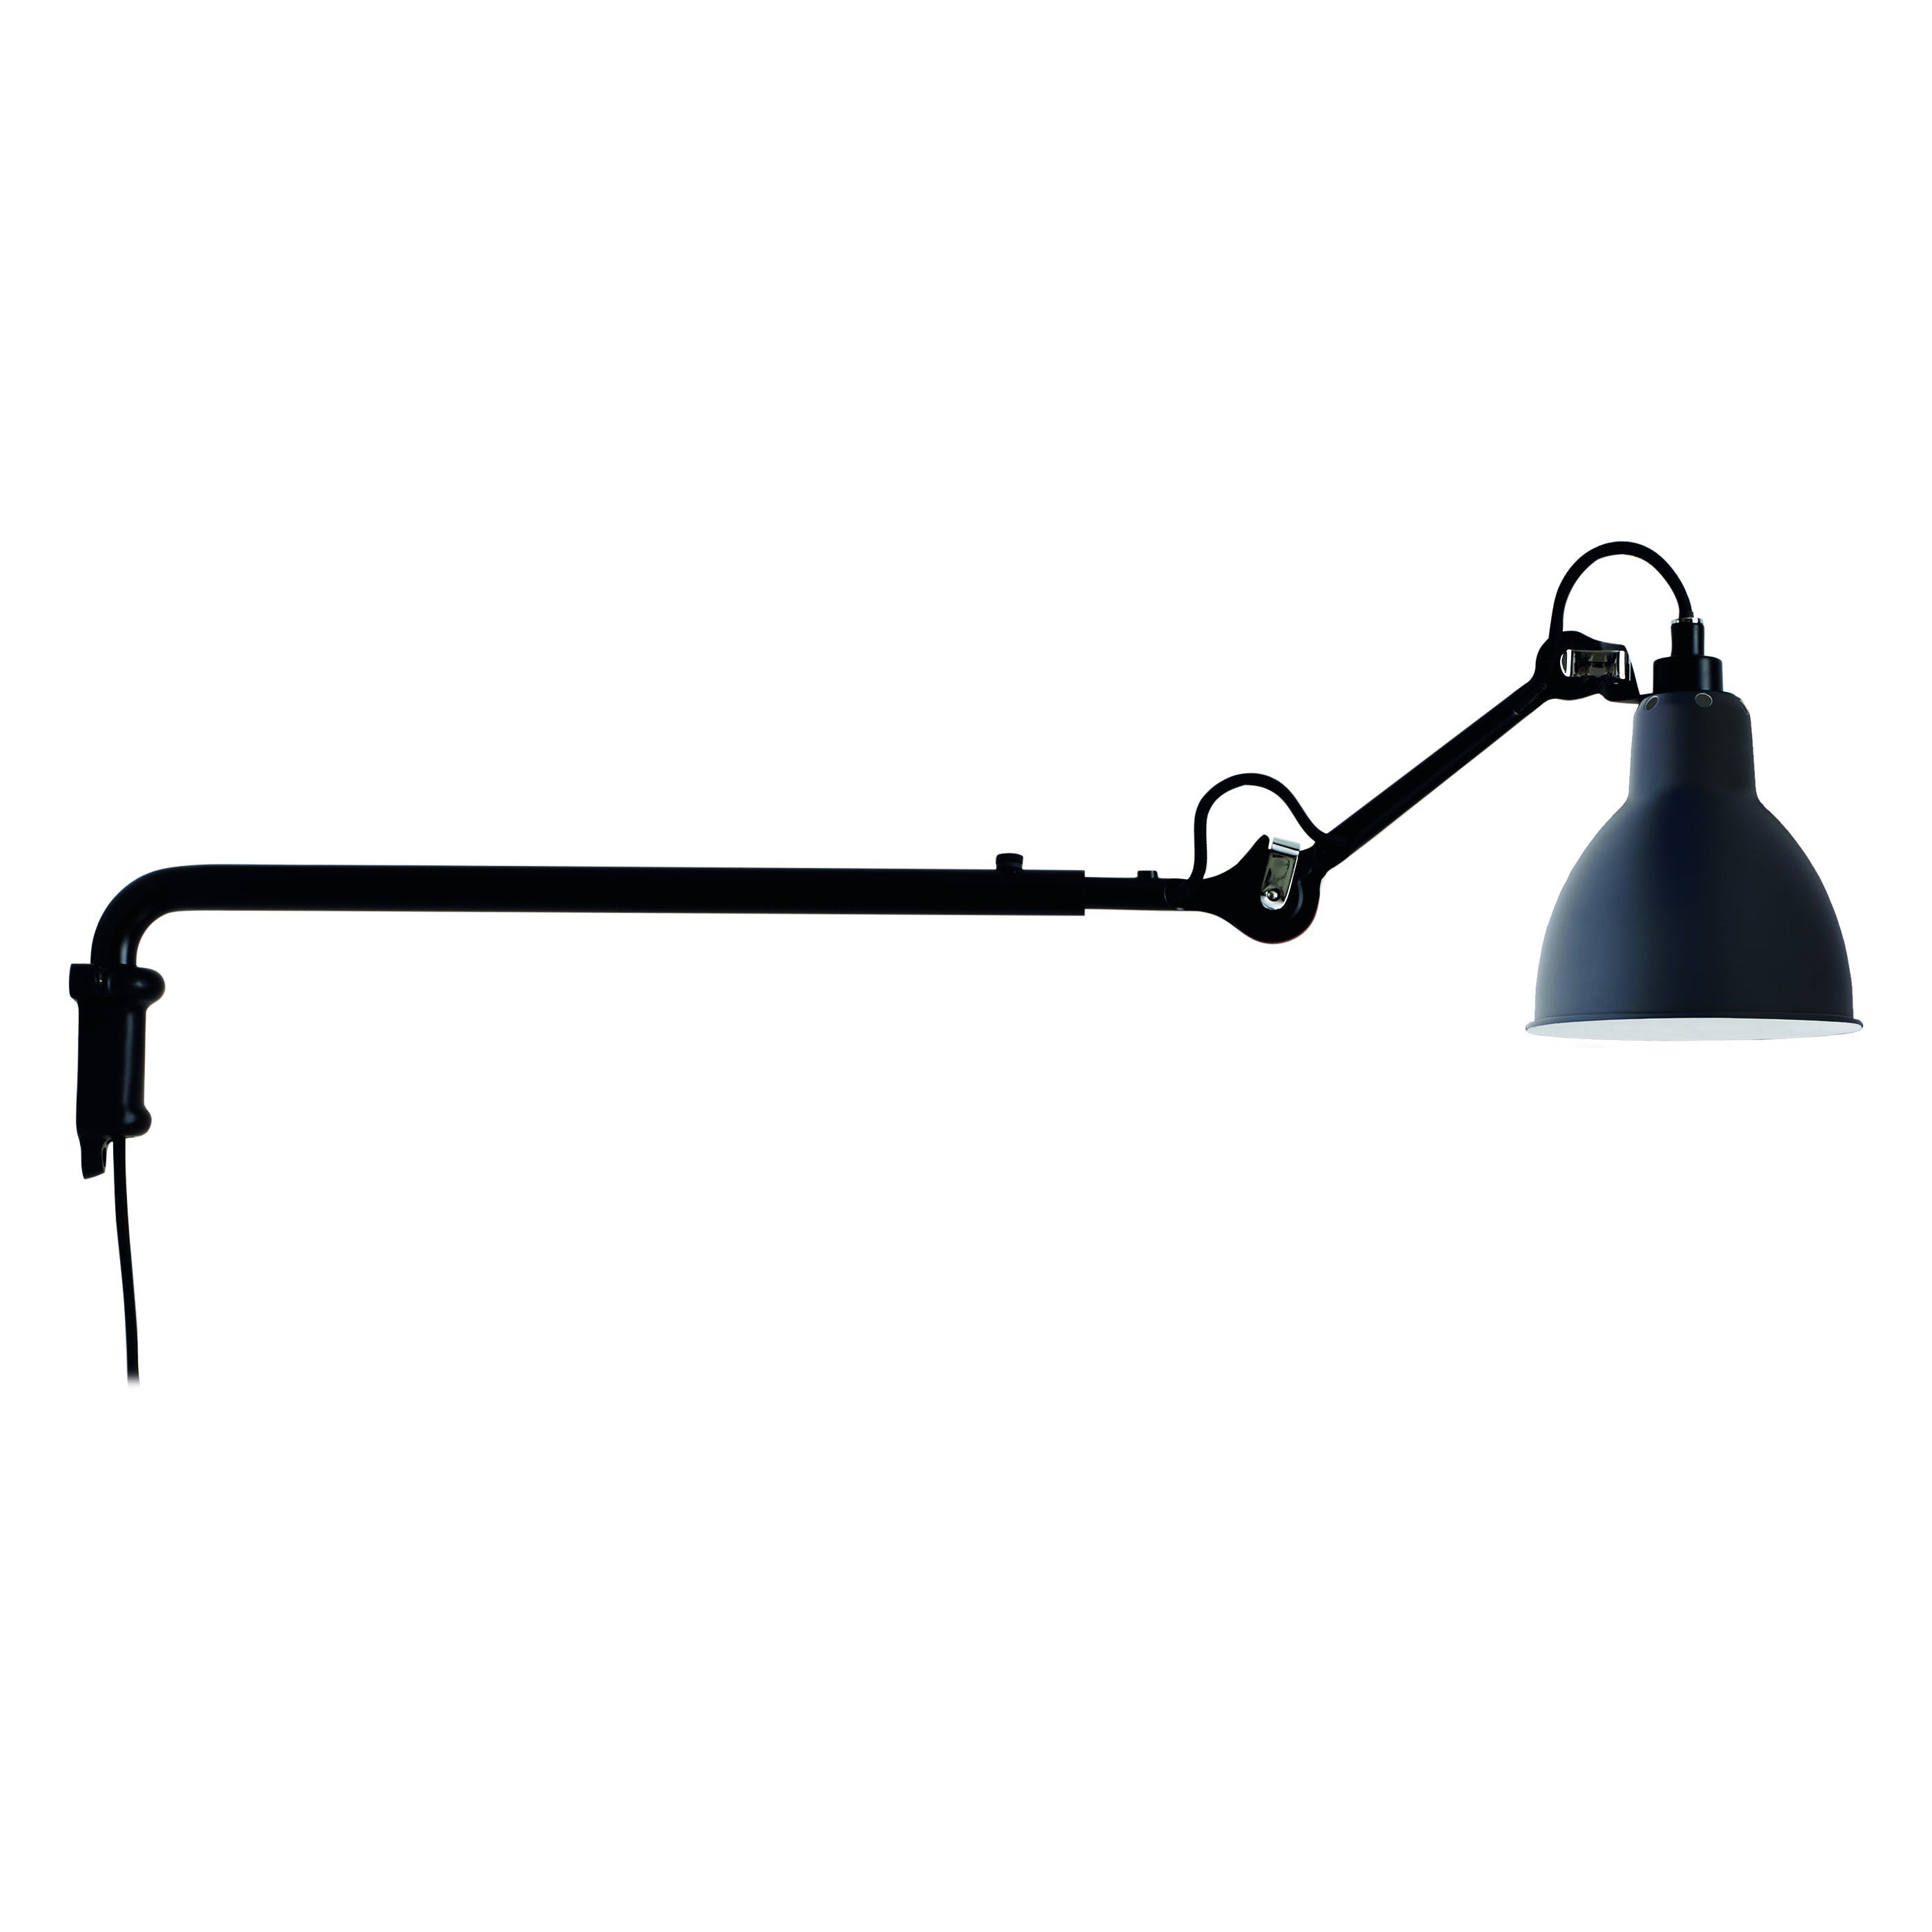 DCW Editions La Lampe Gras N°203 Wall Lamp in Black Steel Arm and Blue Shade For Sale